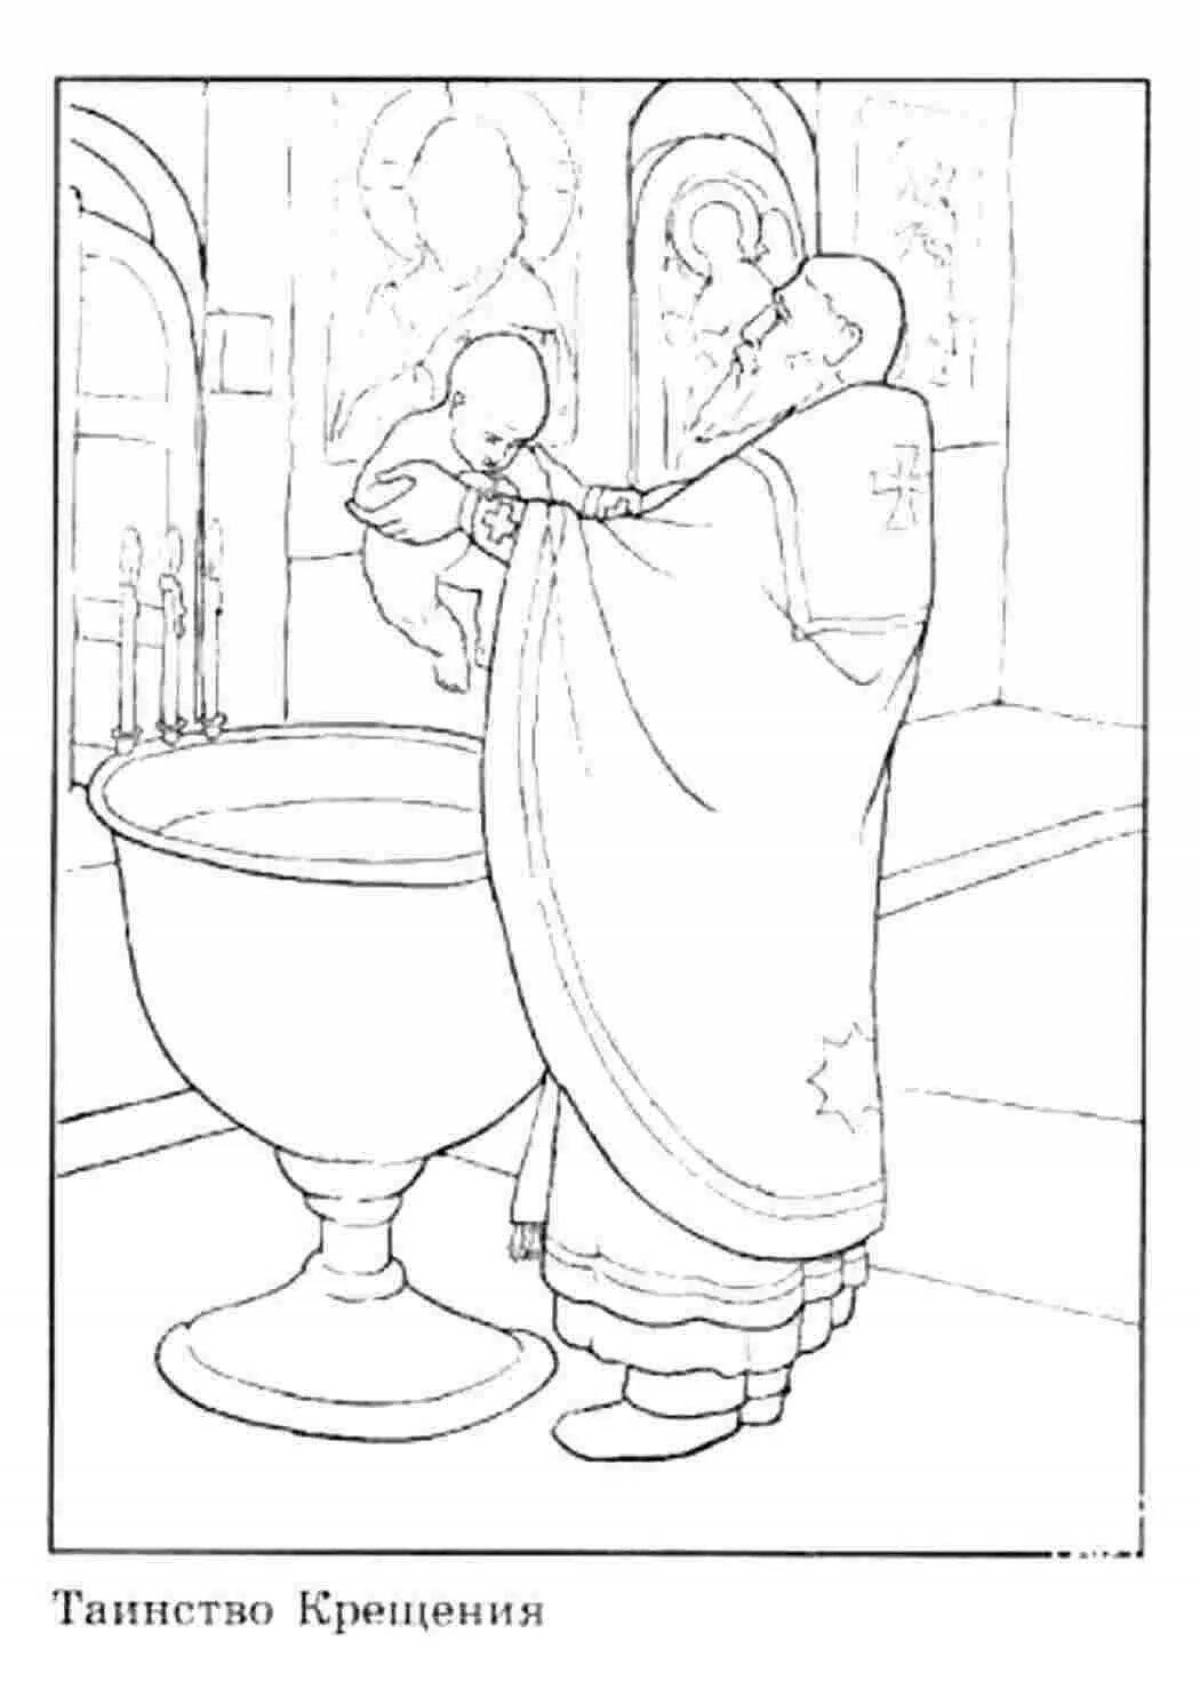 Great epiphany coloring book